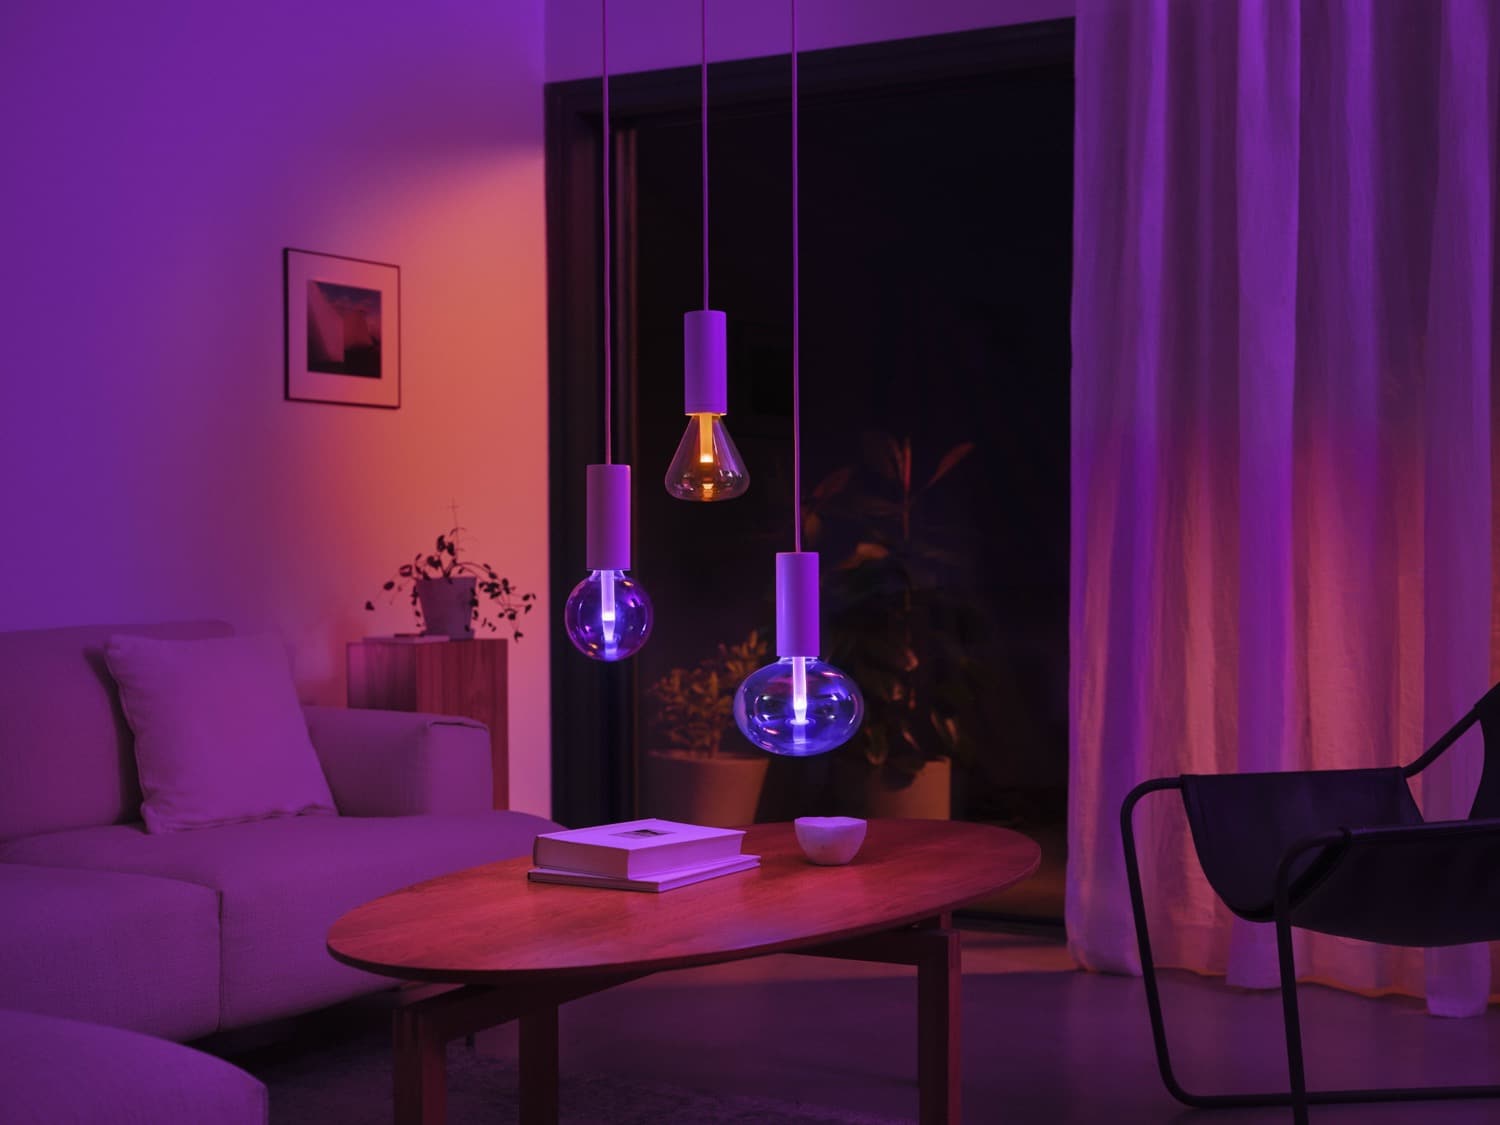 Hueblog: First impression: The new Philips Hue Lightguide series